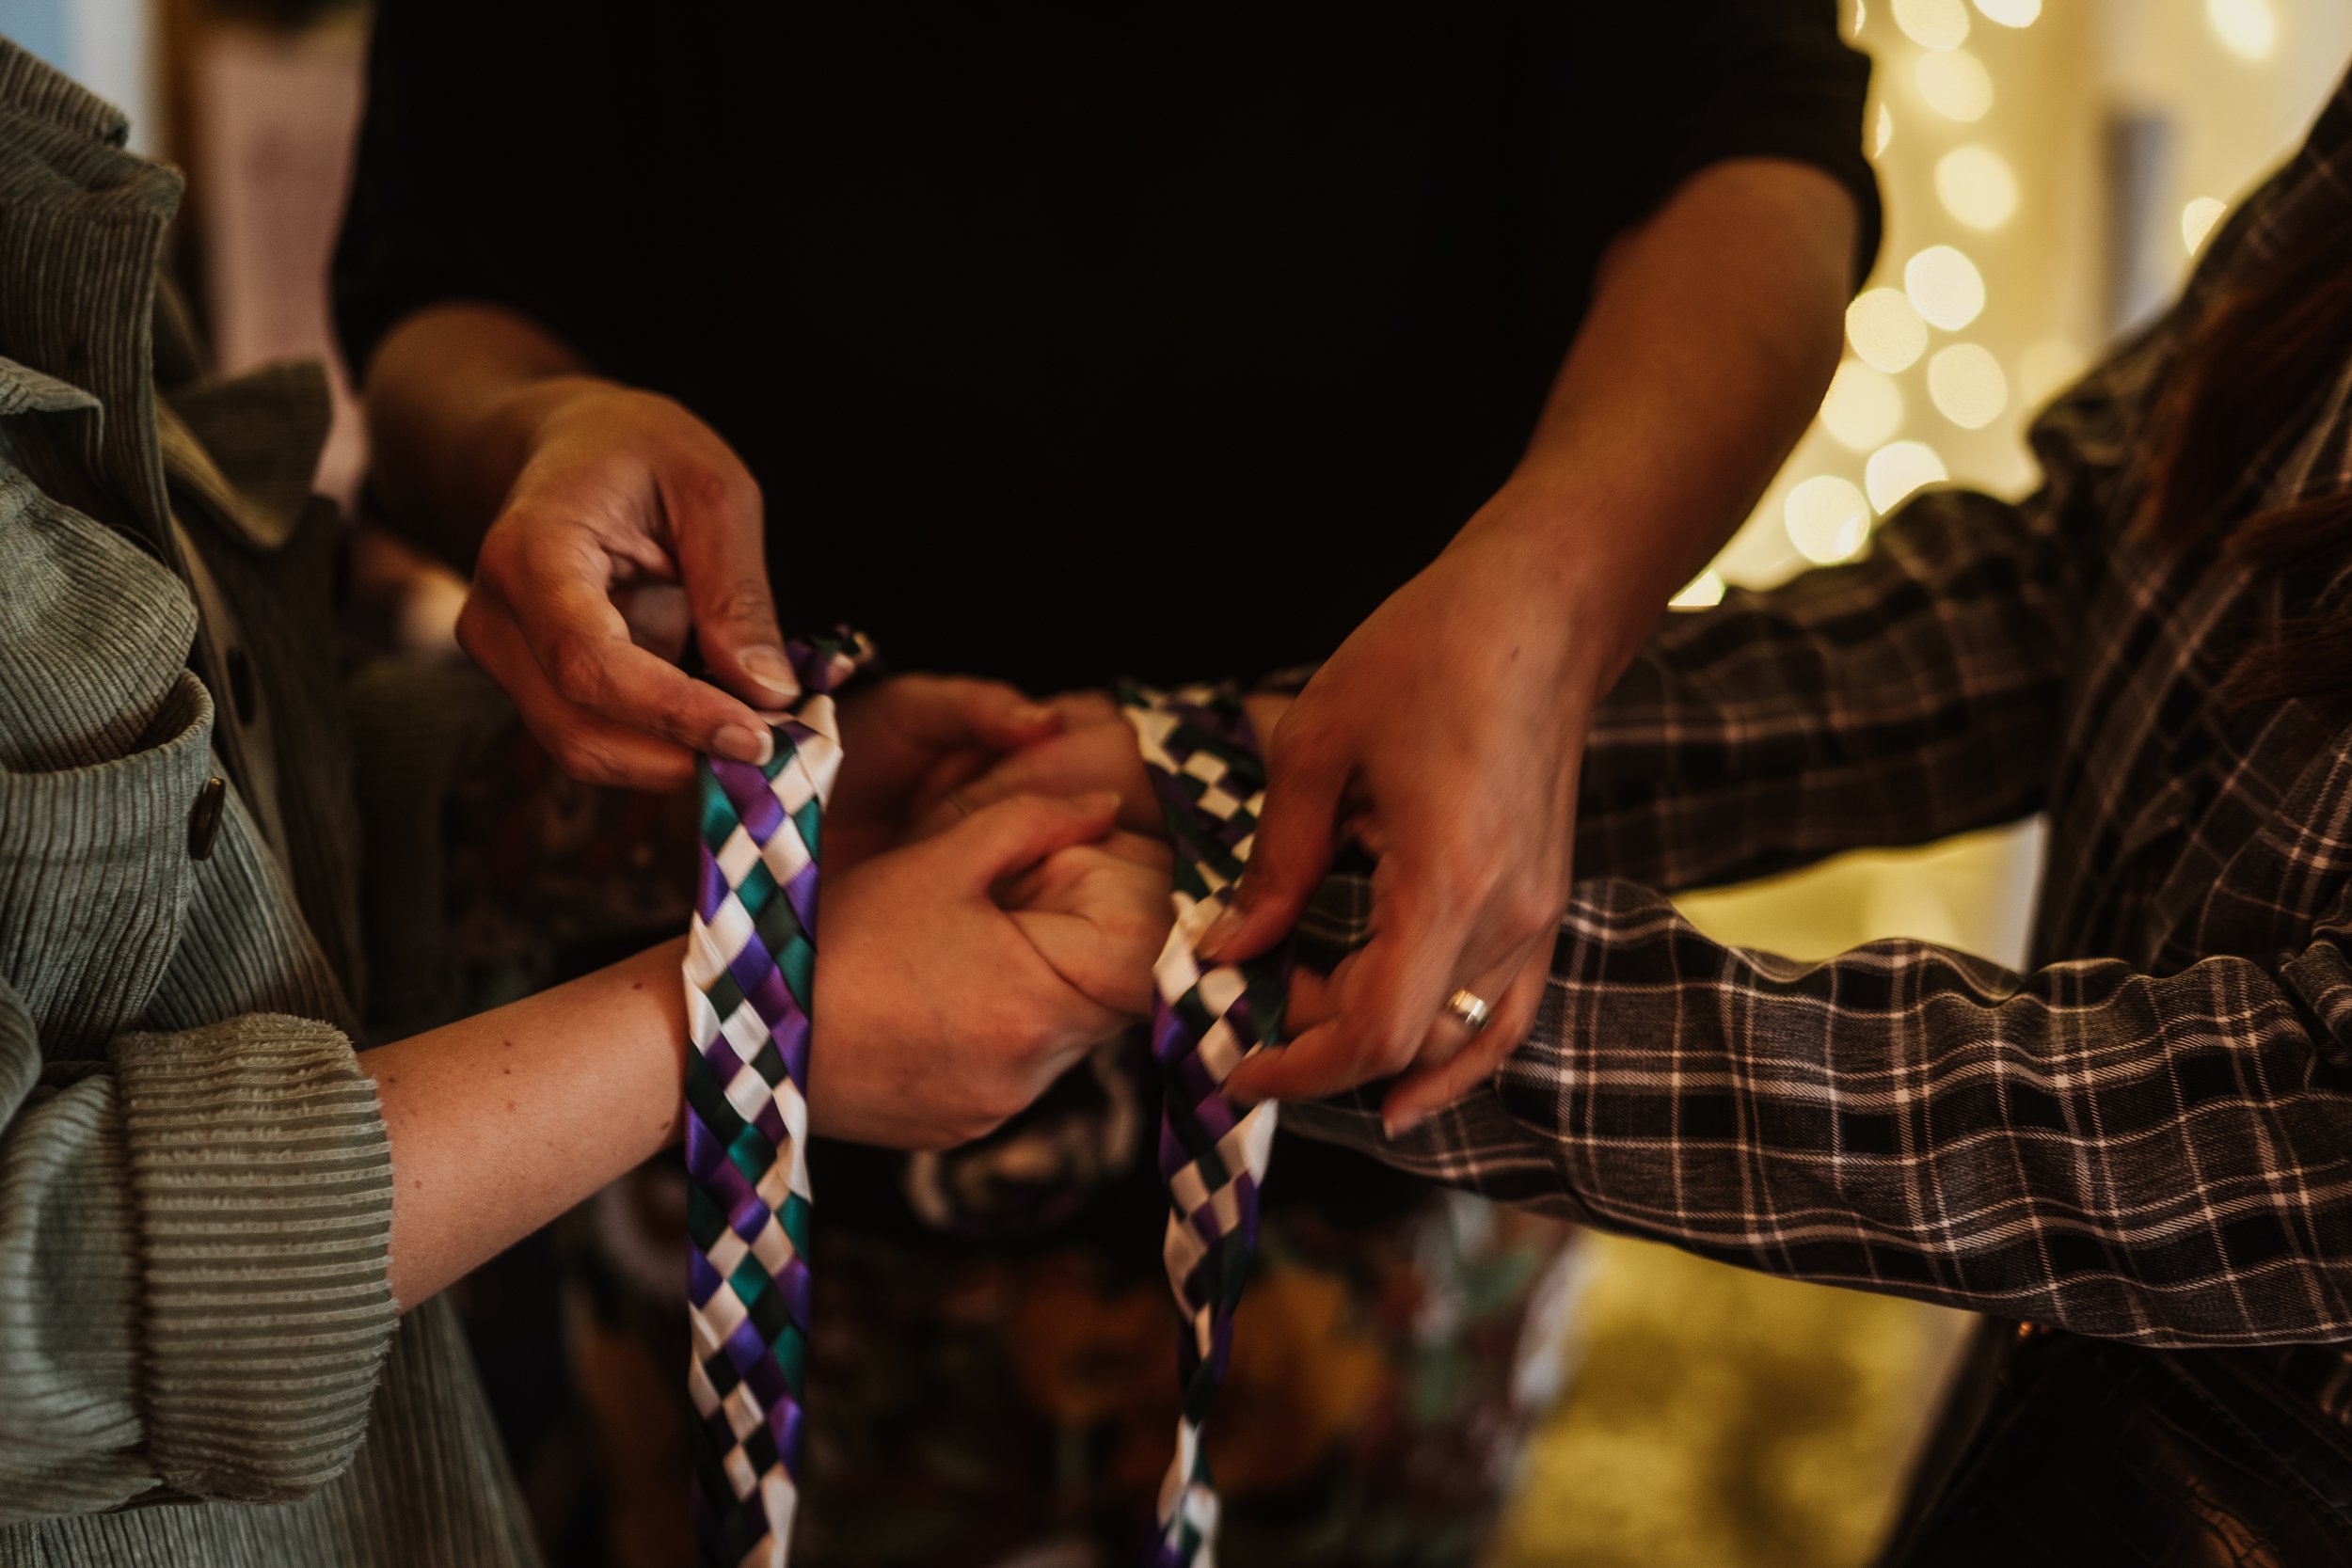  A close up of a handfasting ceremony demo at The Un-Wedding Show. 